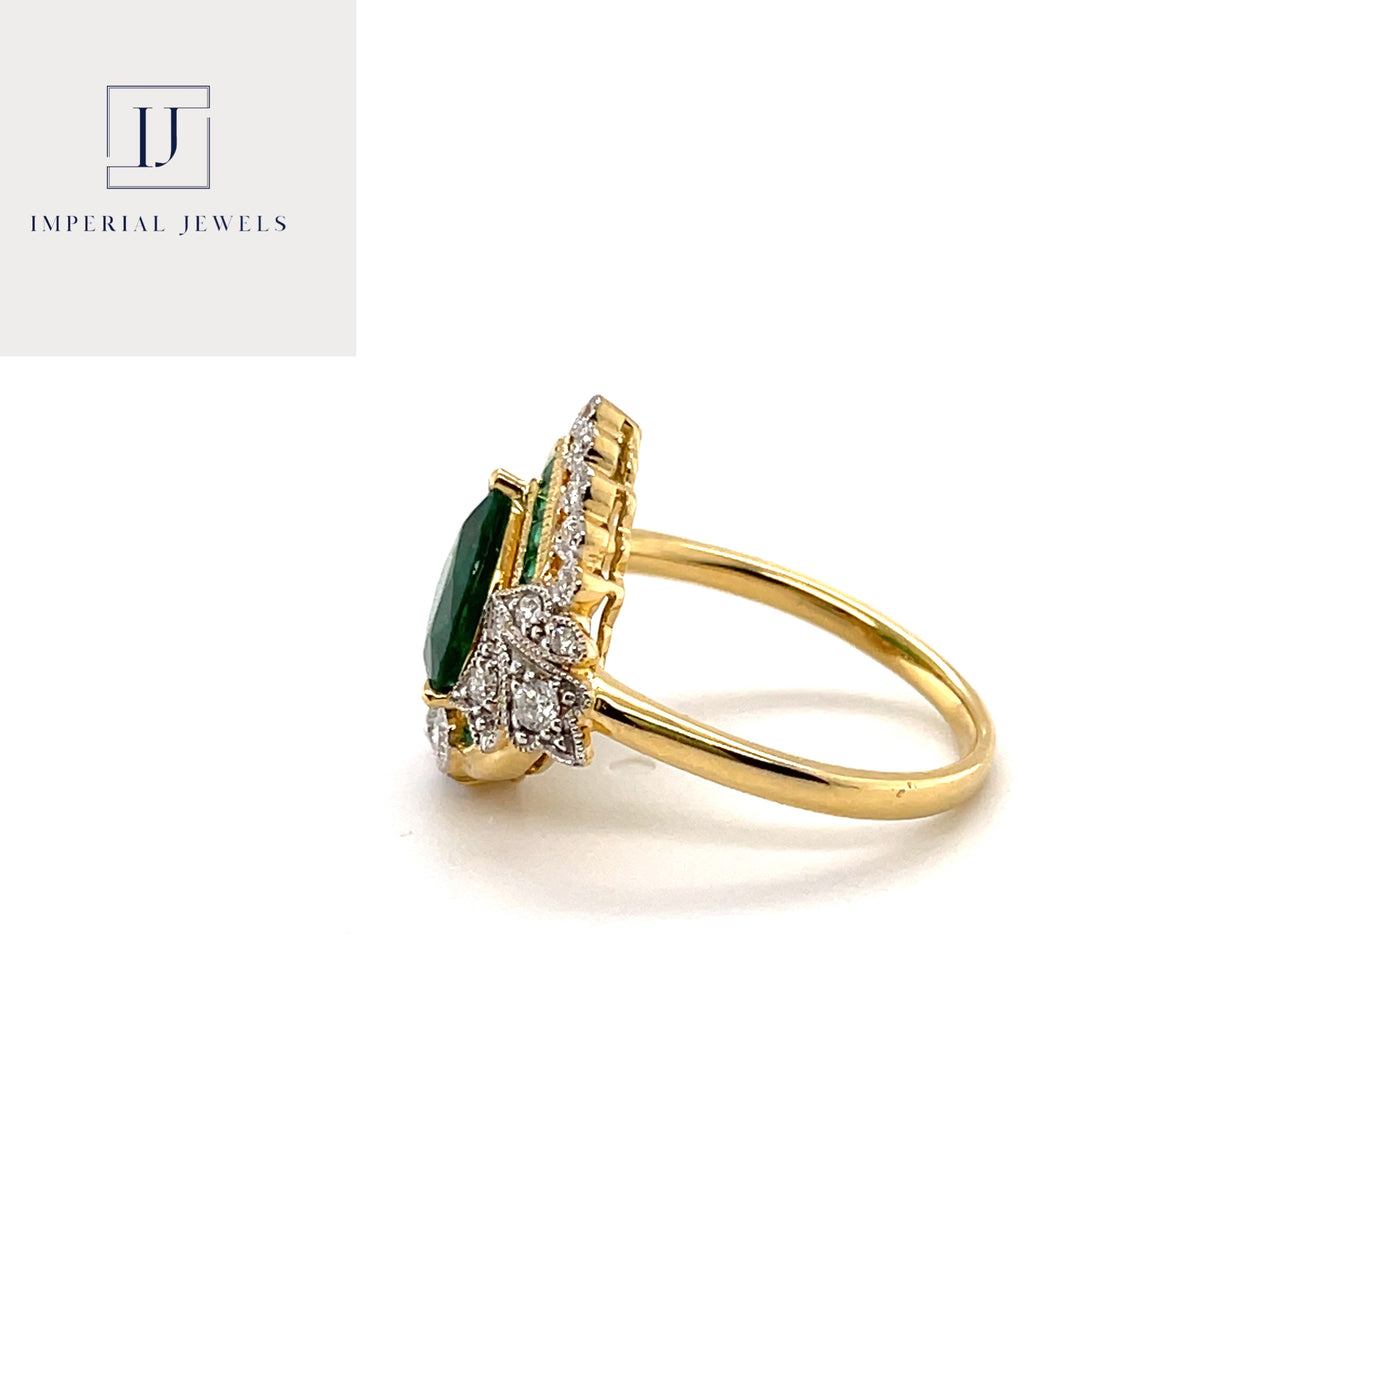 18CT yellow gold heart cut emerald and diamond ring